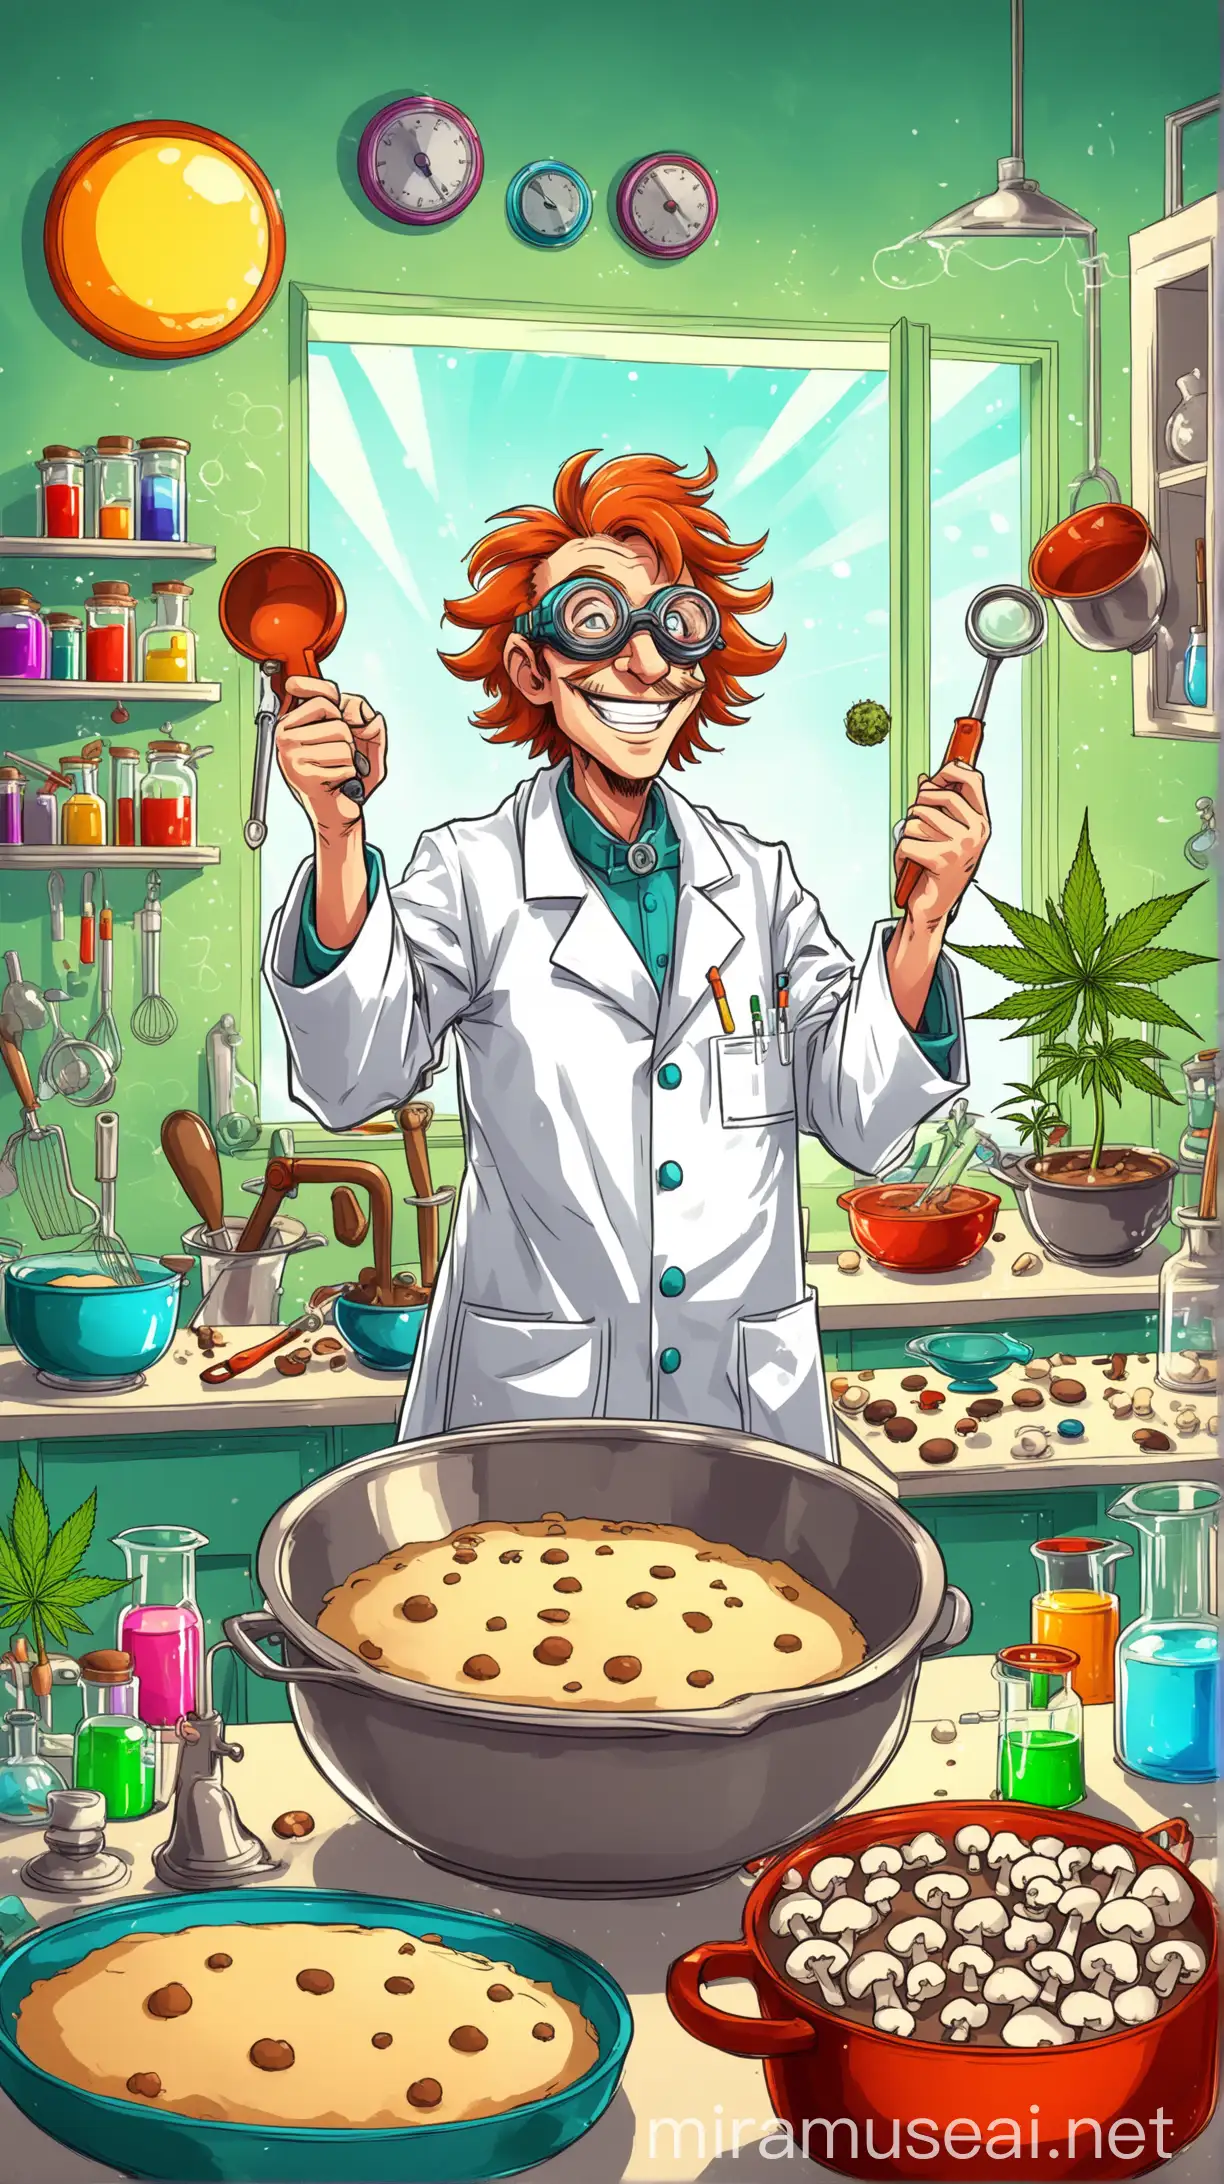 Cheerful Mad Scientist Baking Adventure with Cannabis Plants and Desserts